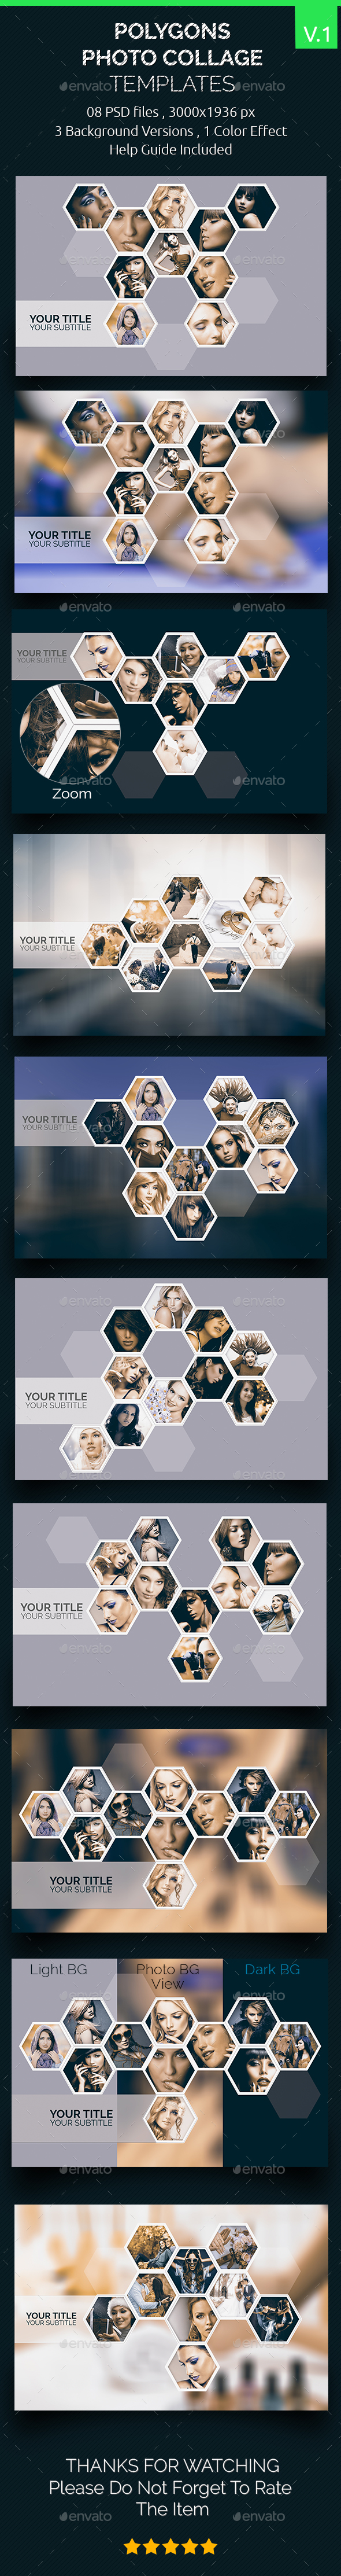 Polygons Photo Collage Templates